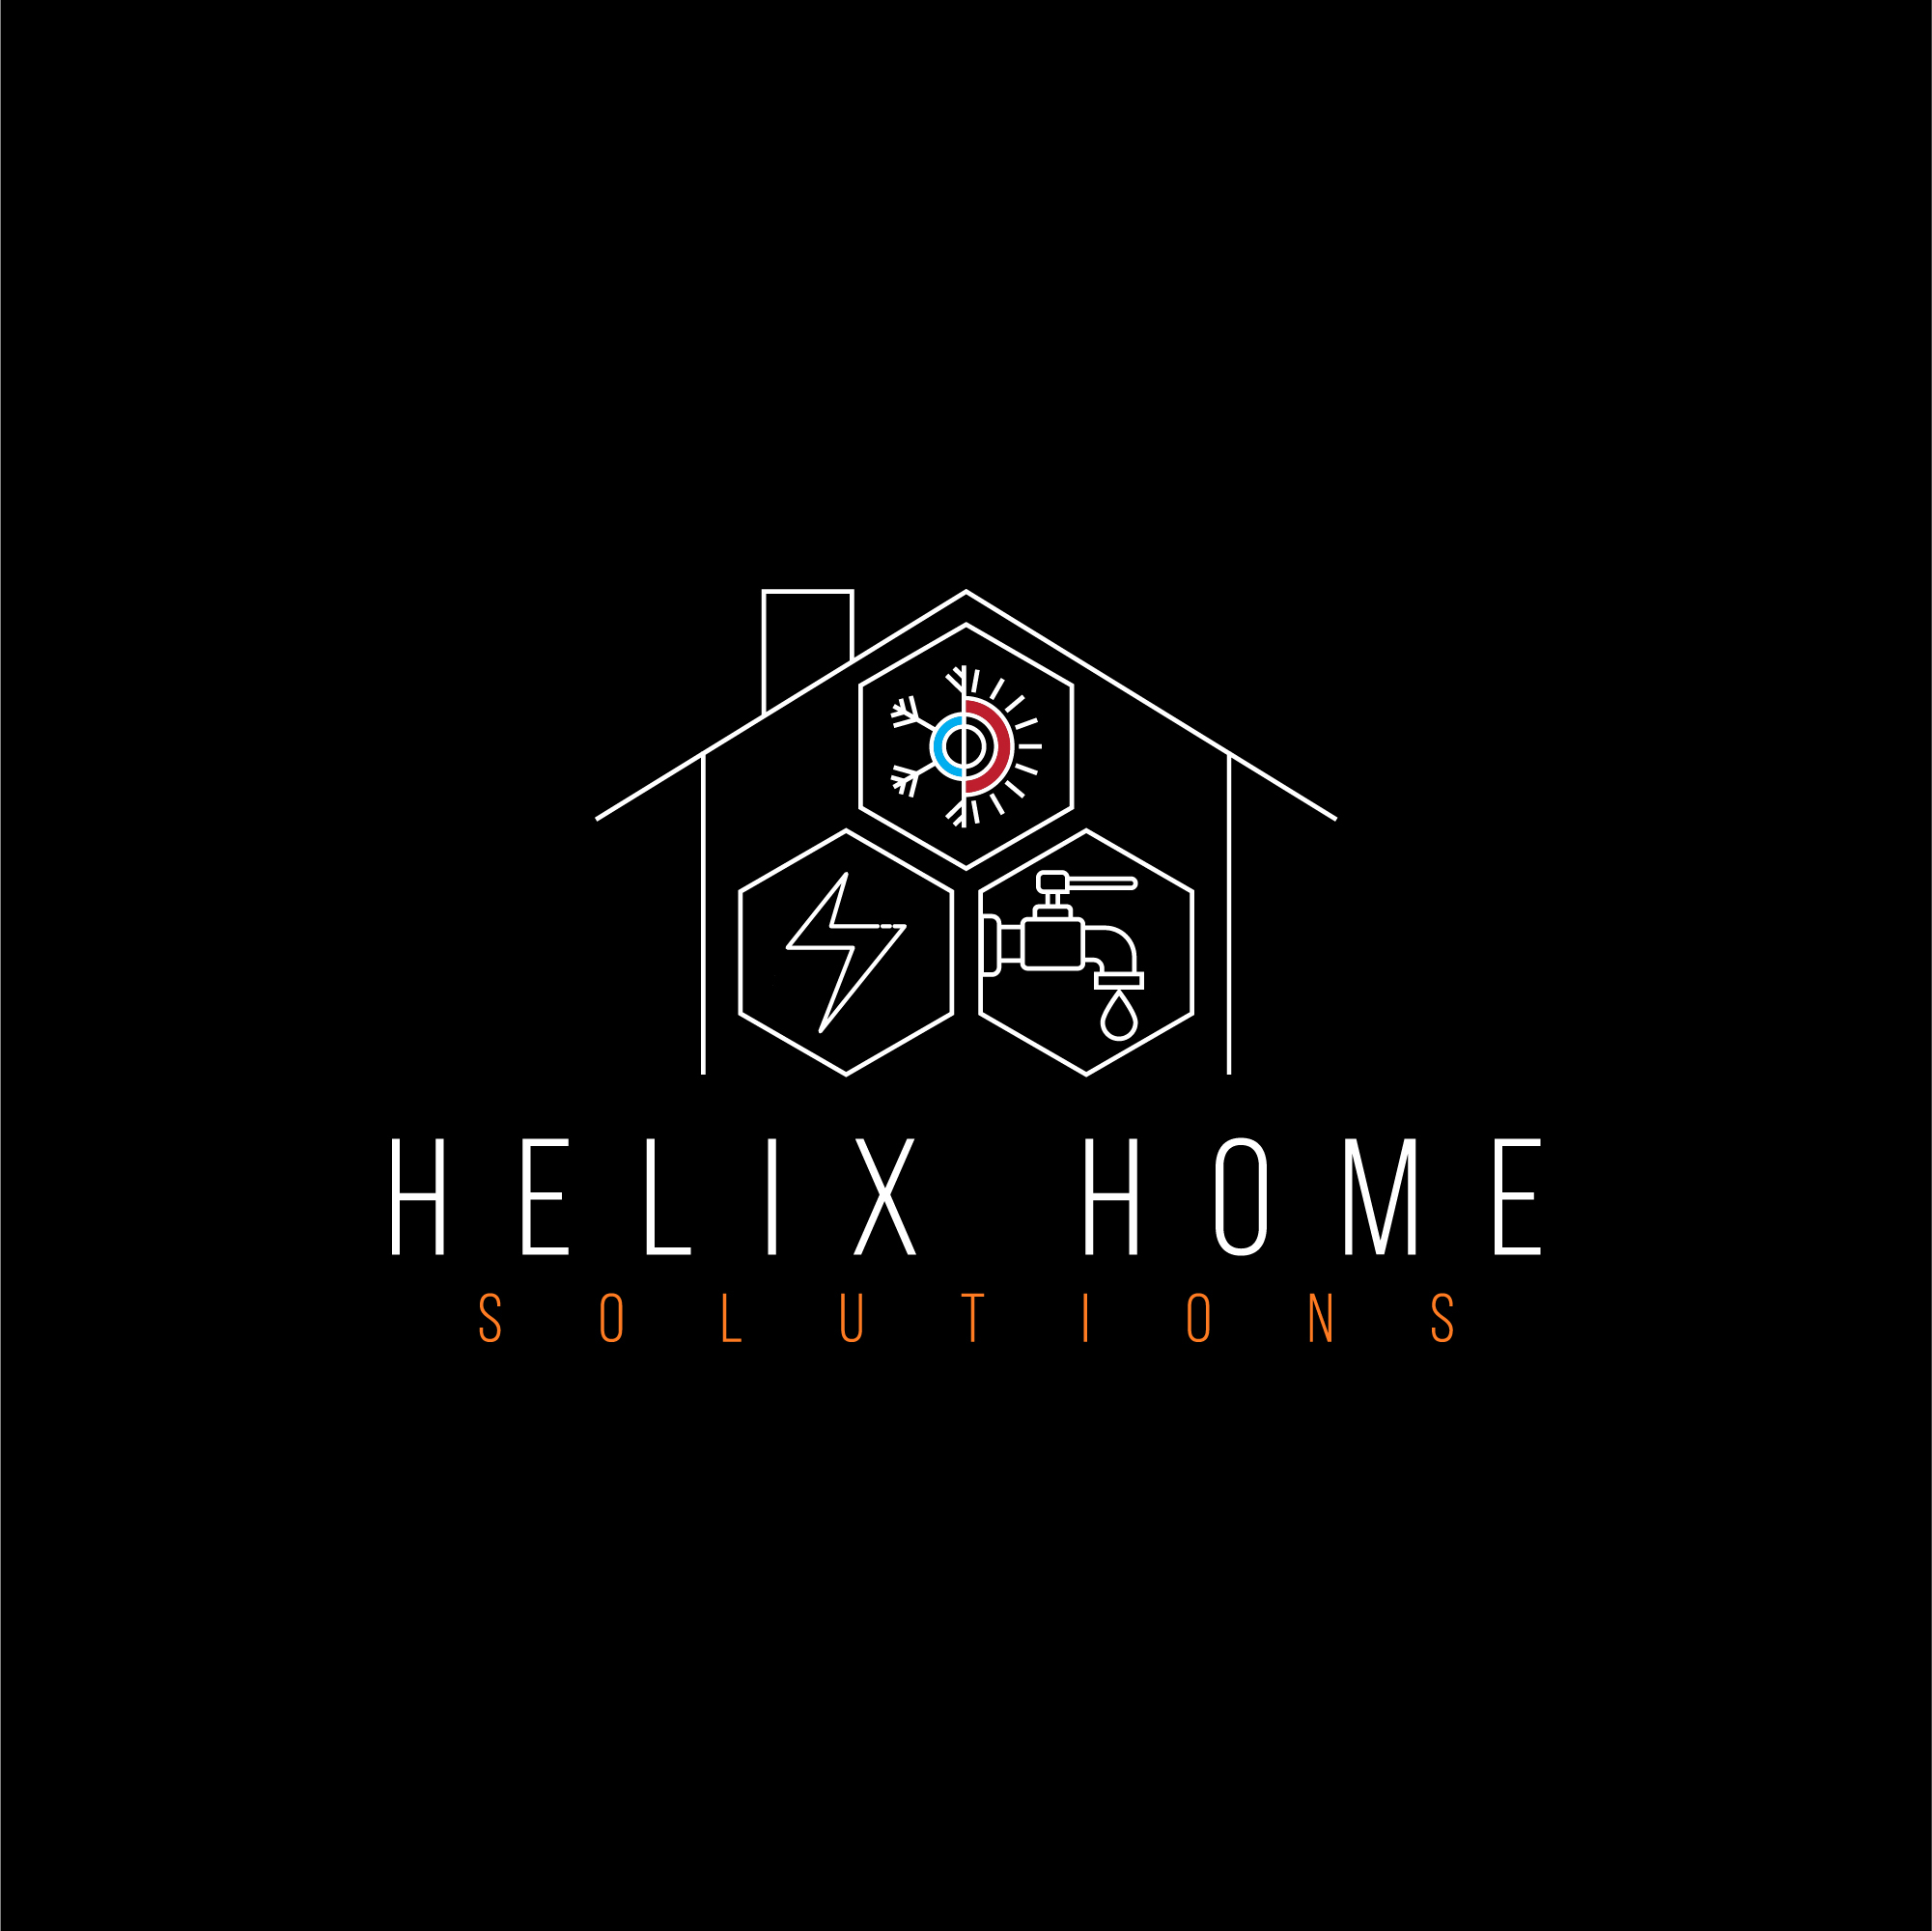 Helix Home Solutions's logo